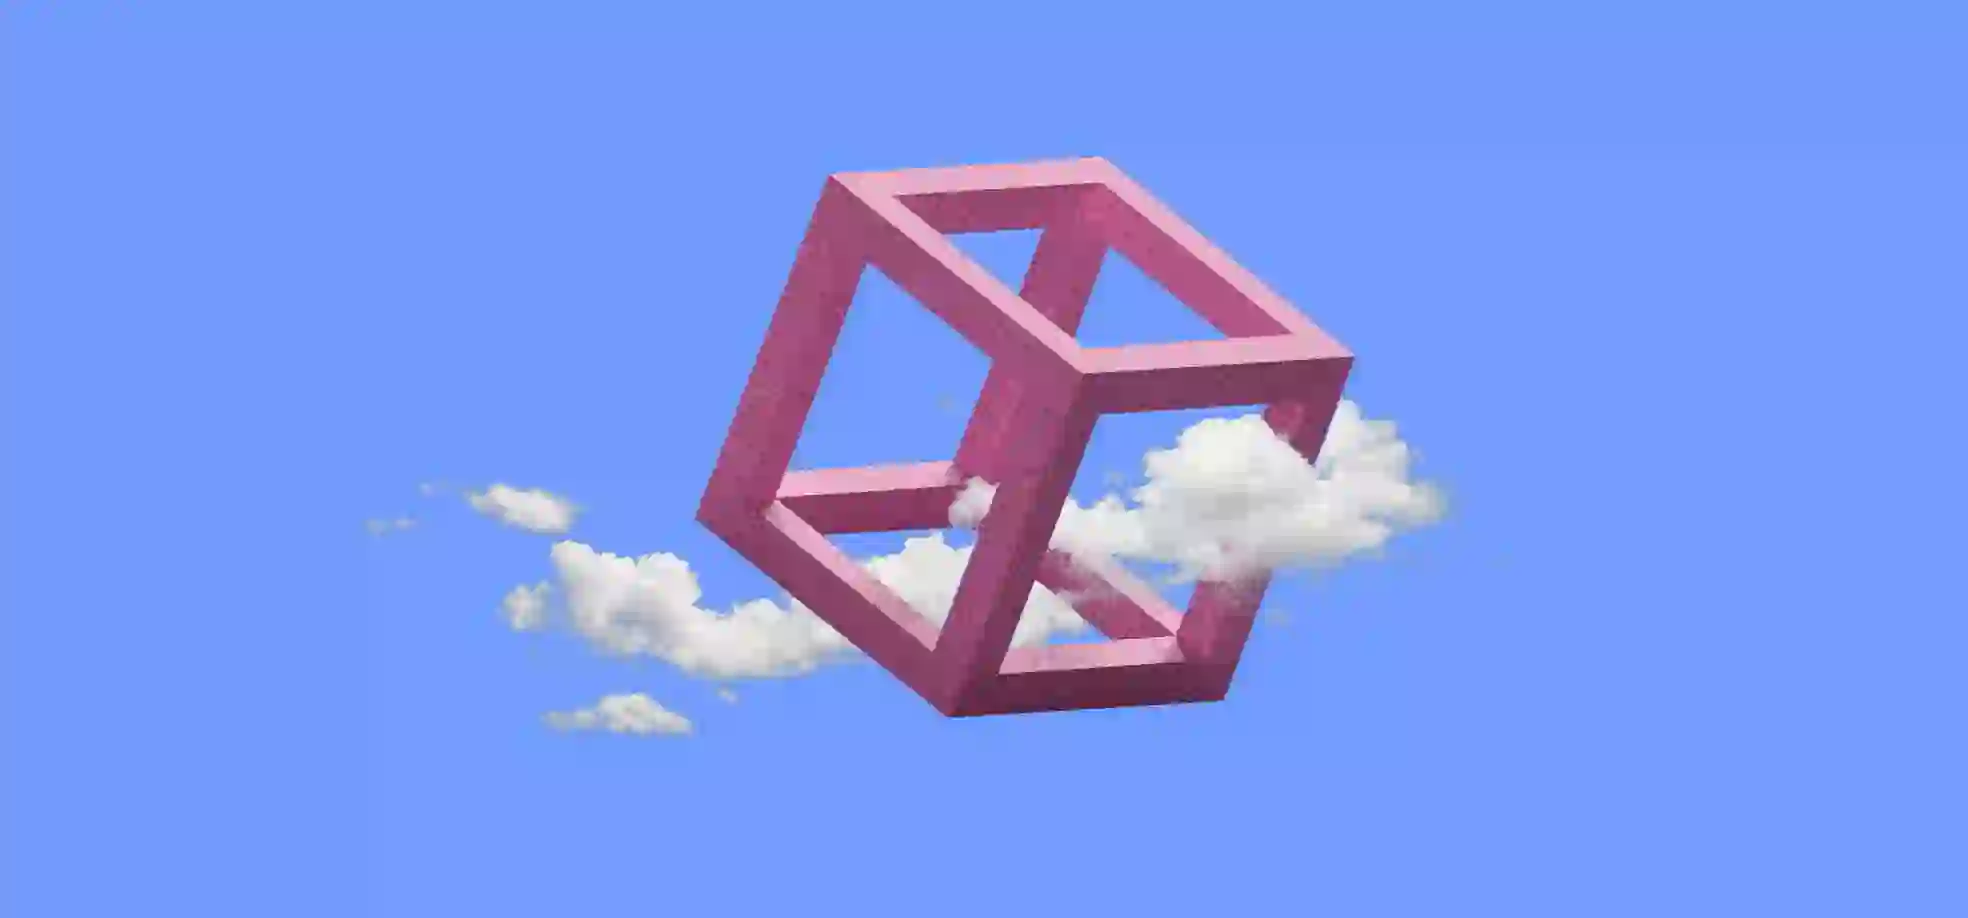 Cube with clouds on the blue background illustration